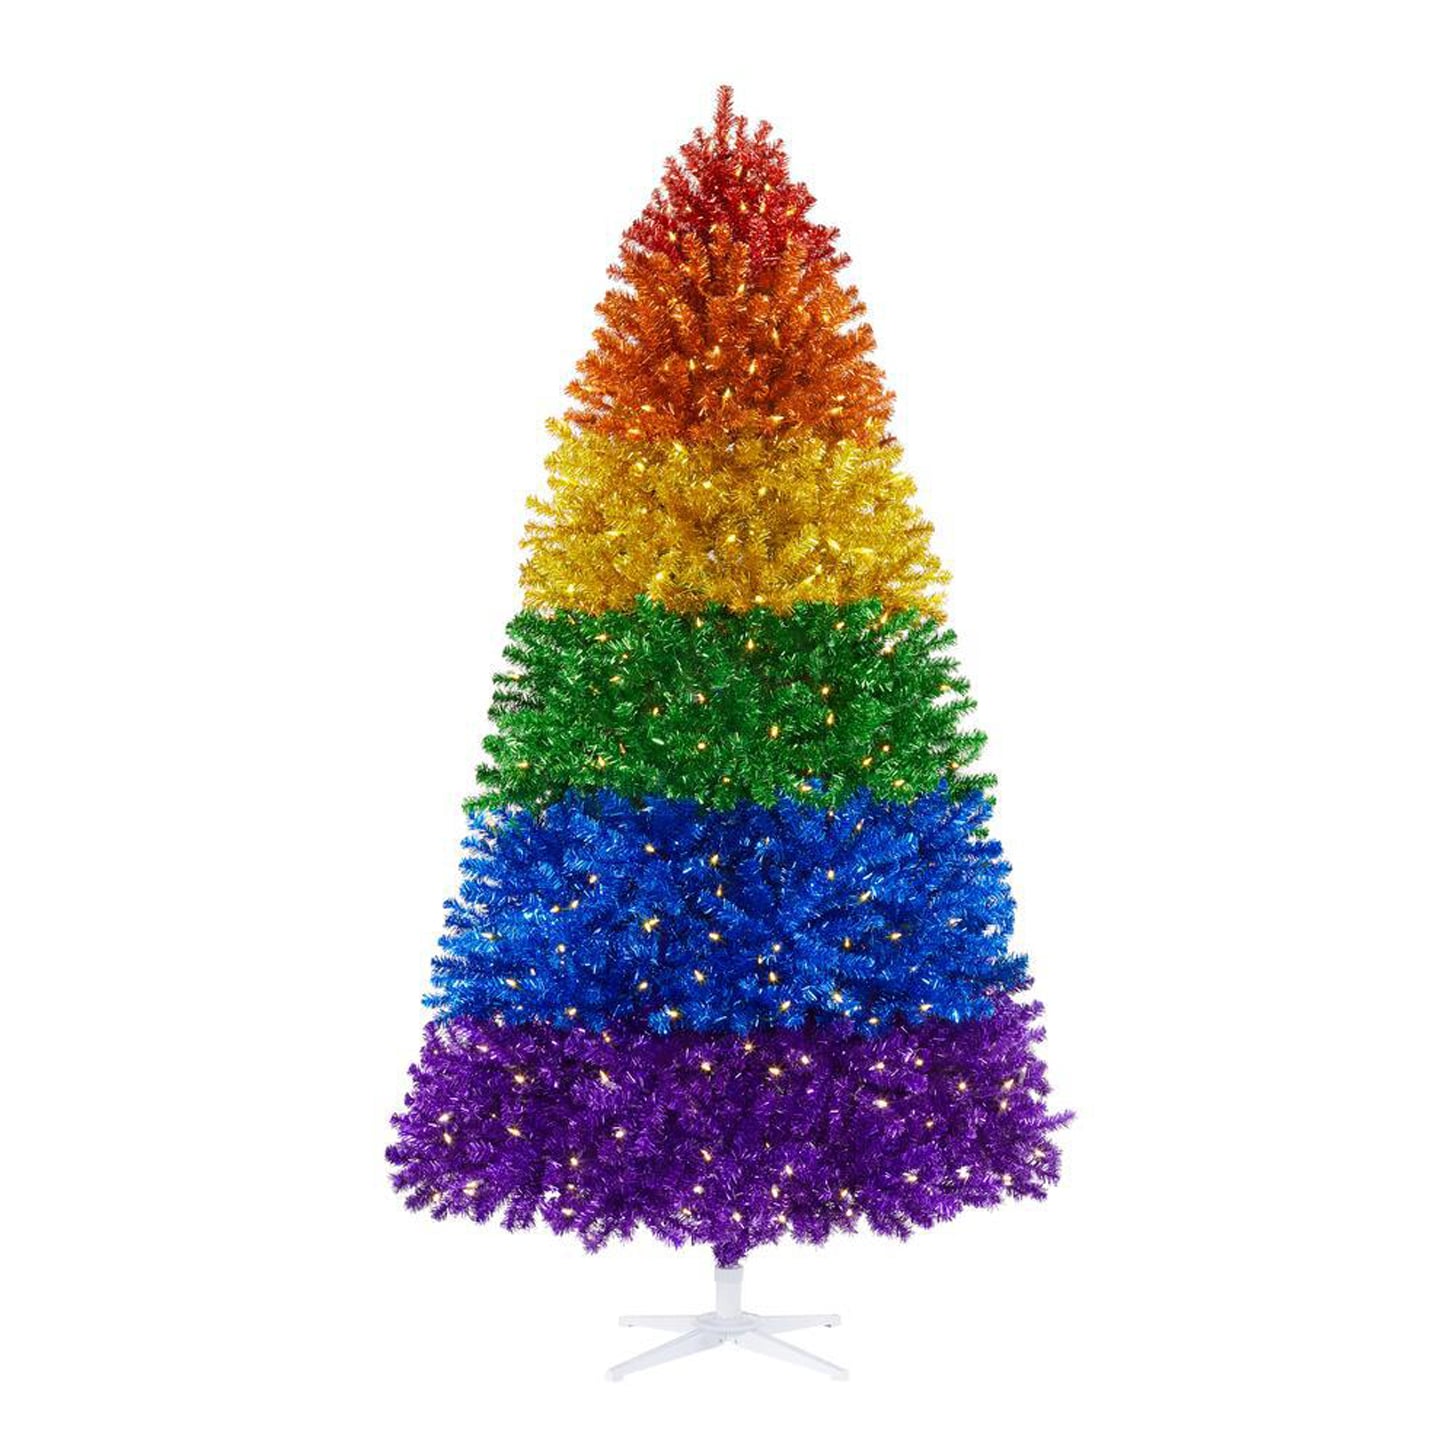 Home Depot Is Selling a Rainbow Christmas Tree! | POPSUGAR Home